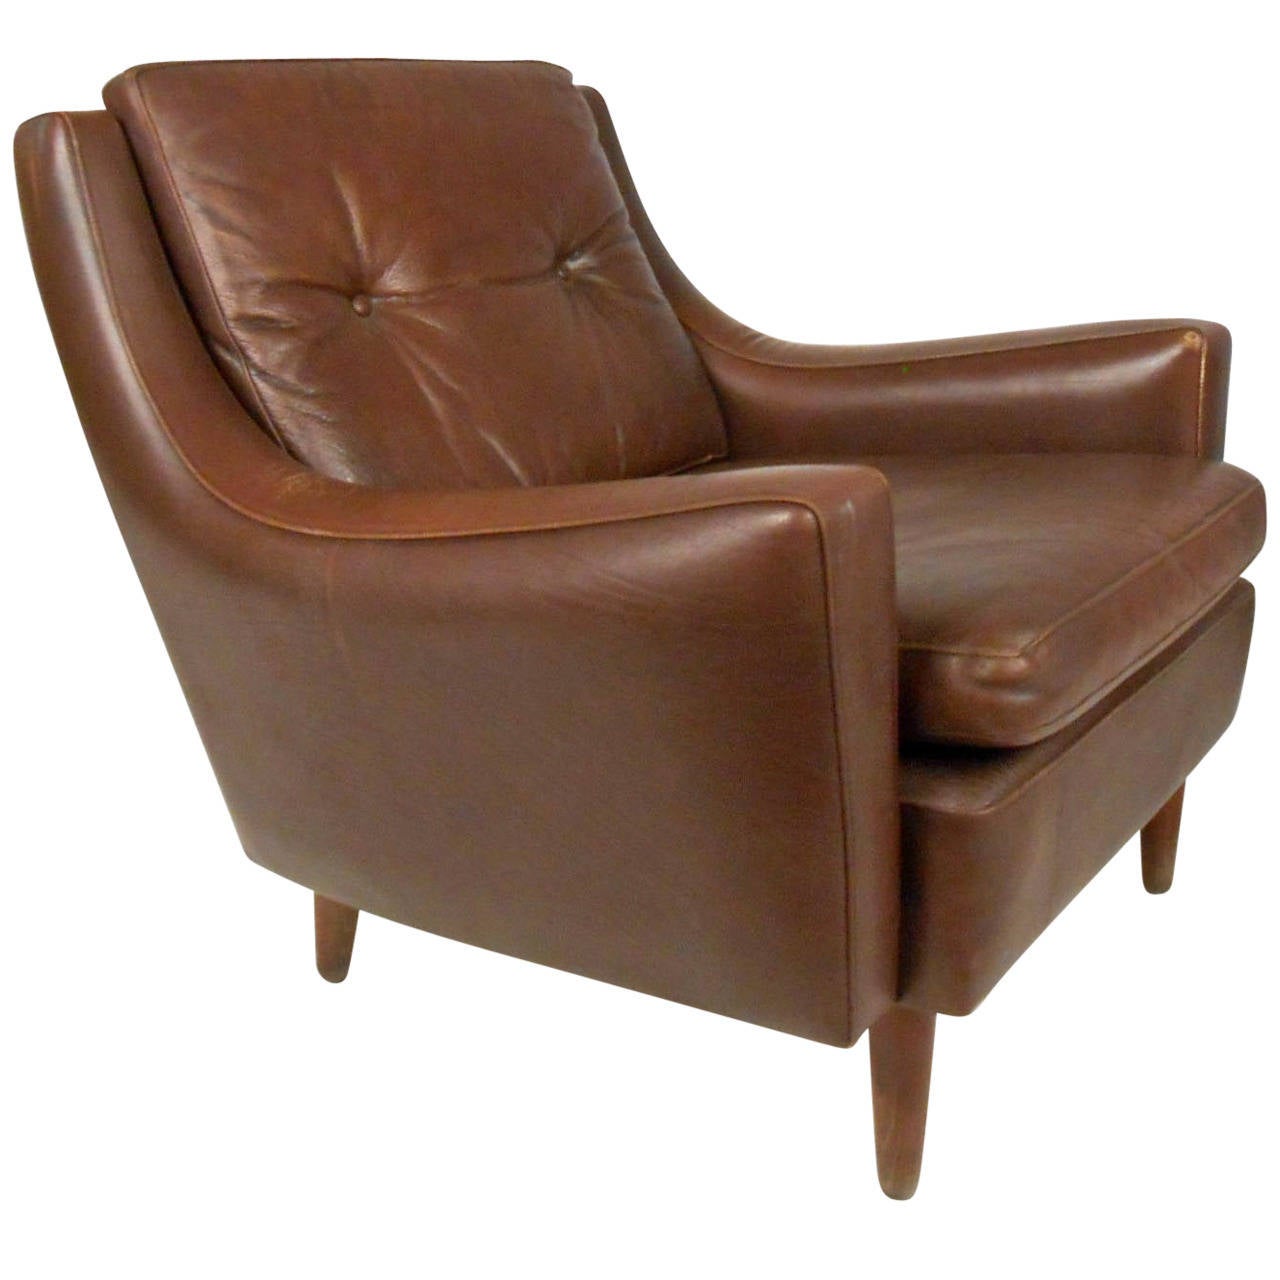 Mid-Century Modern Tufted Brown Leather Club Chair at 1stdibs